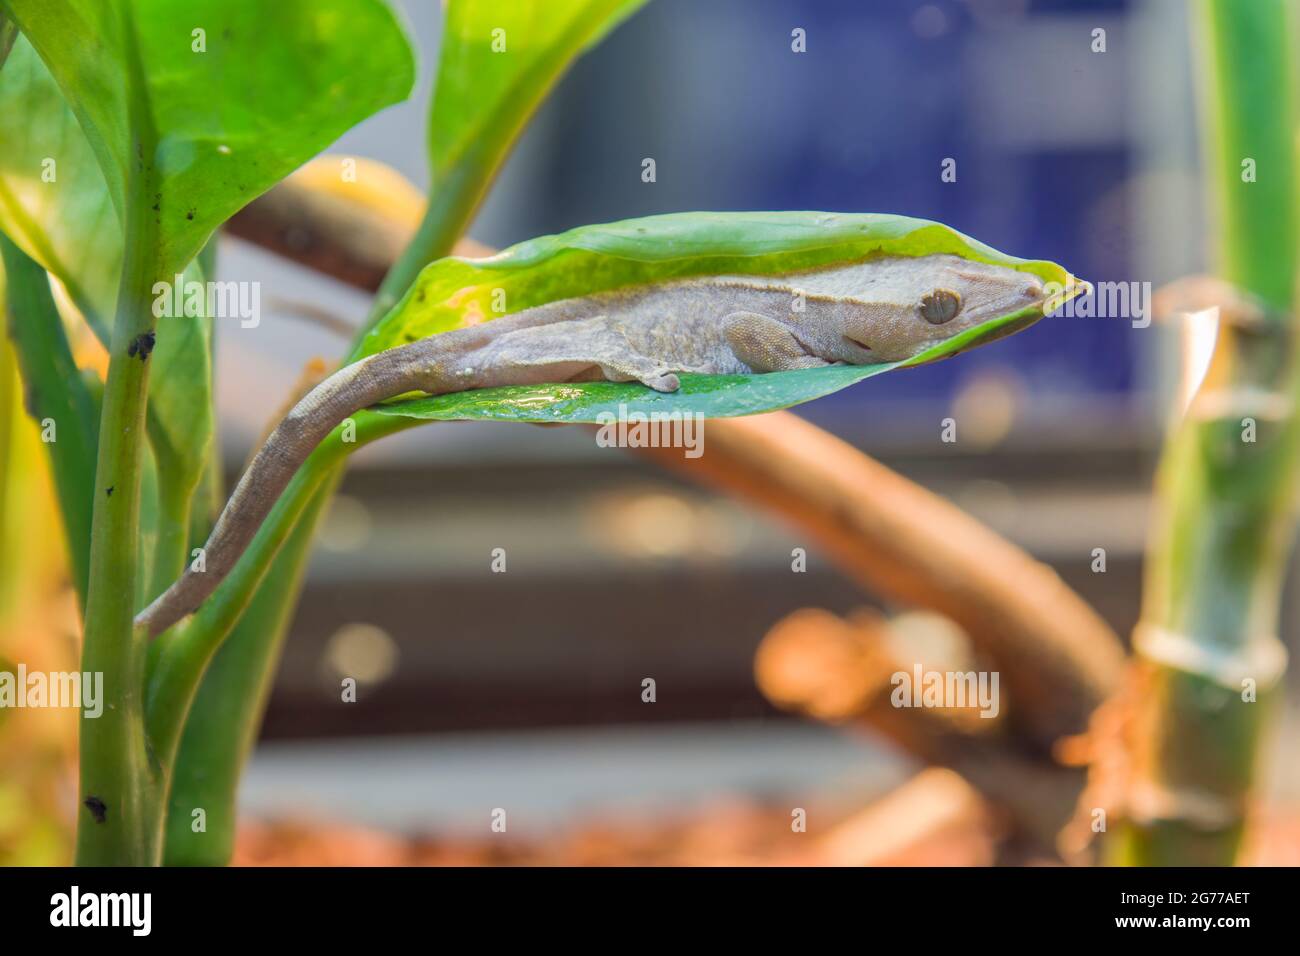 A baby crested gecko(Correlophus ciliatus) is sleeping on the leaf.  It is a species of gecko native to southern New Caledonia. Stock Photo